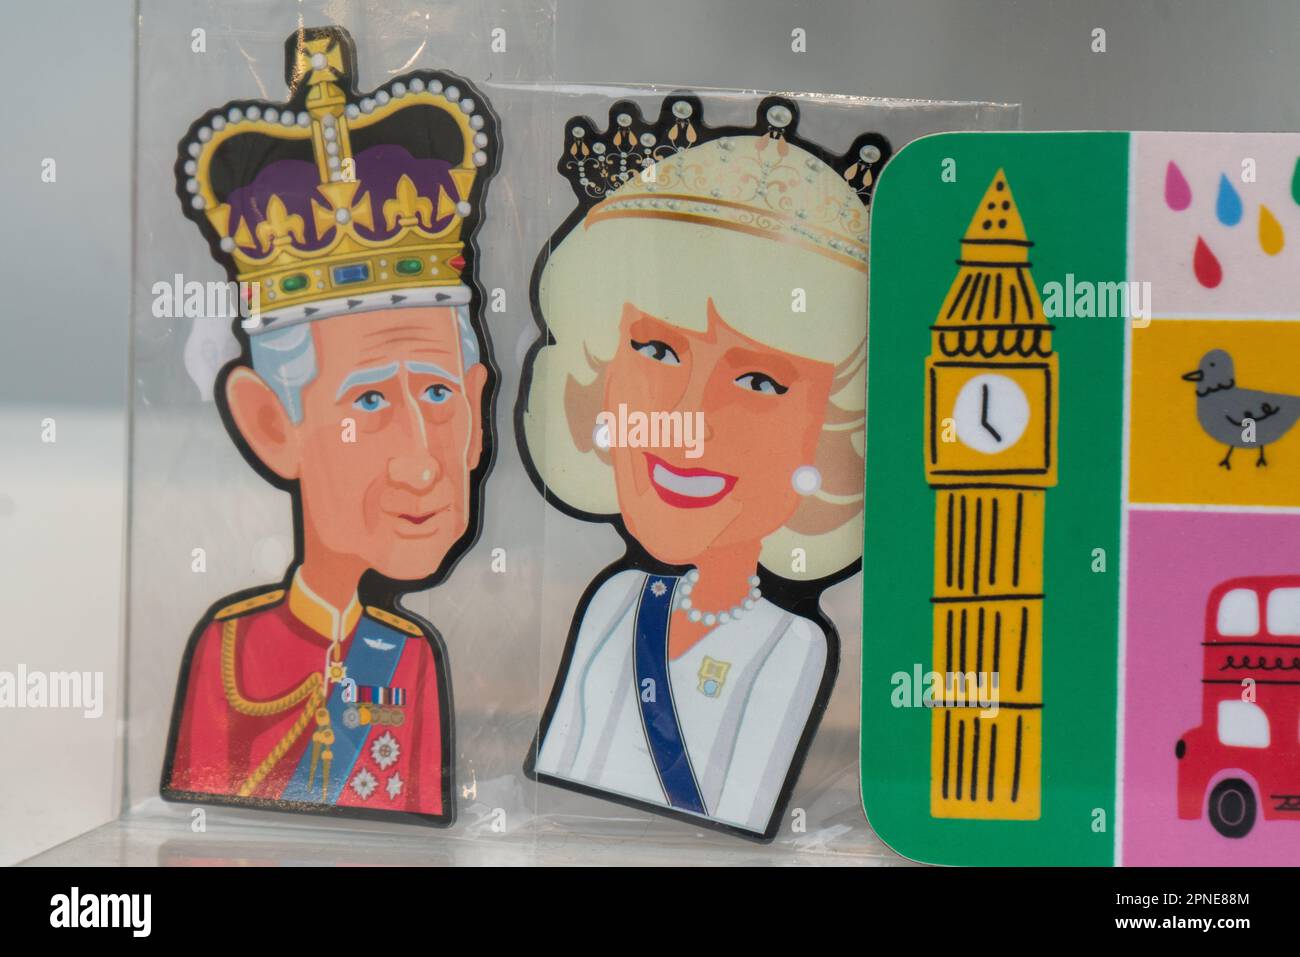 Coronation memorabilia featuring King Charles III and Camilla Queen consort displayed in a shop window in  central London Stock Photo